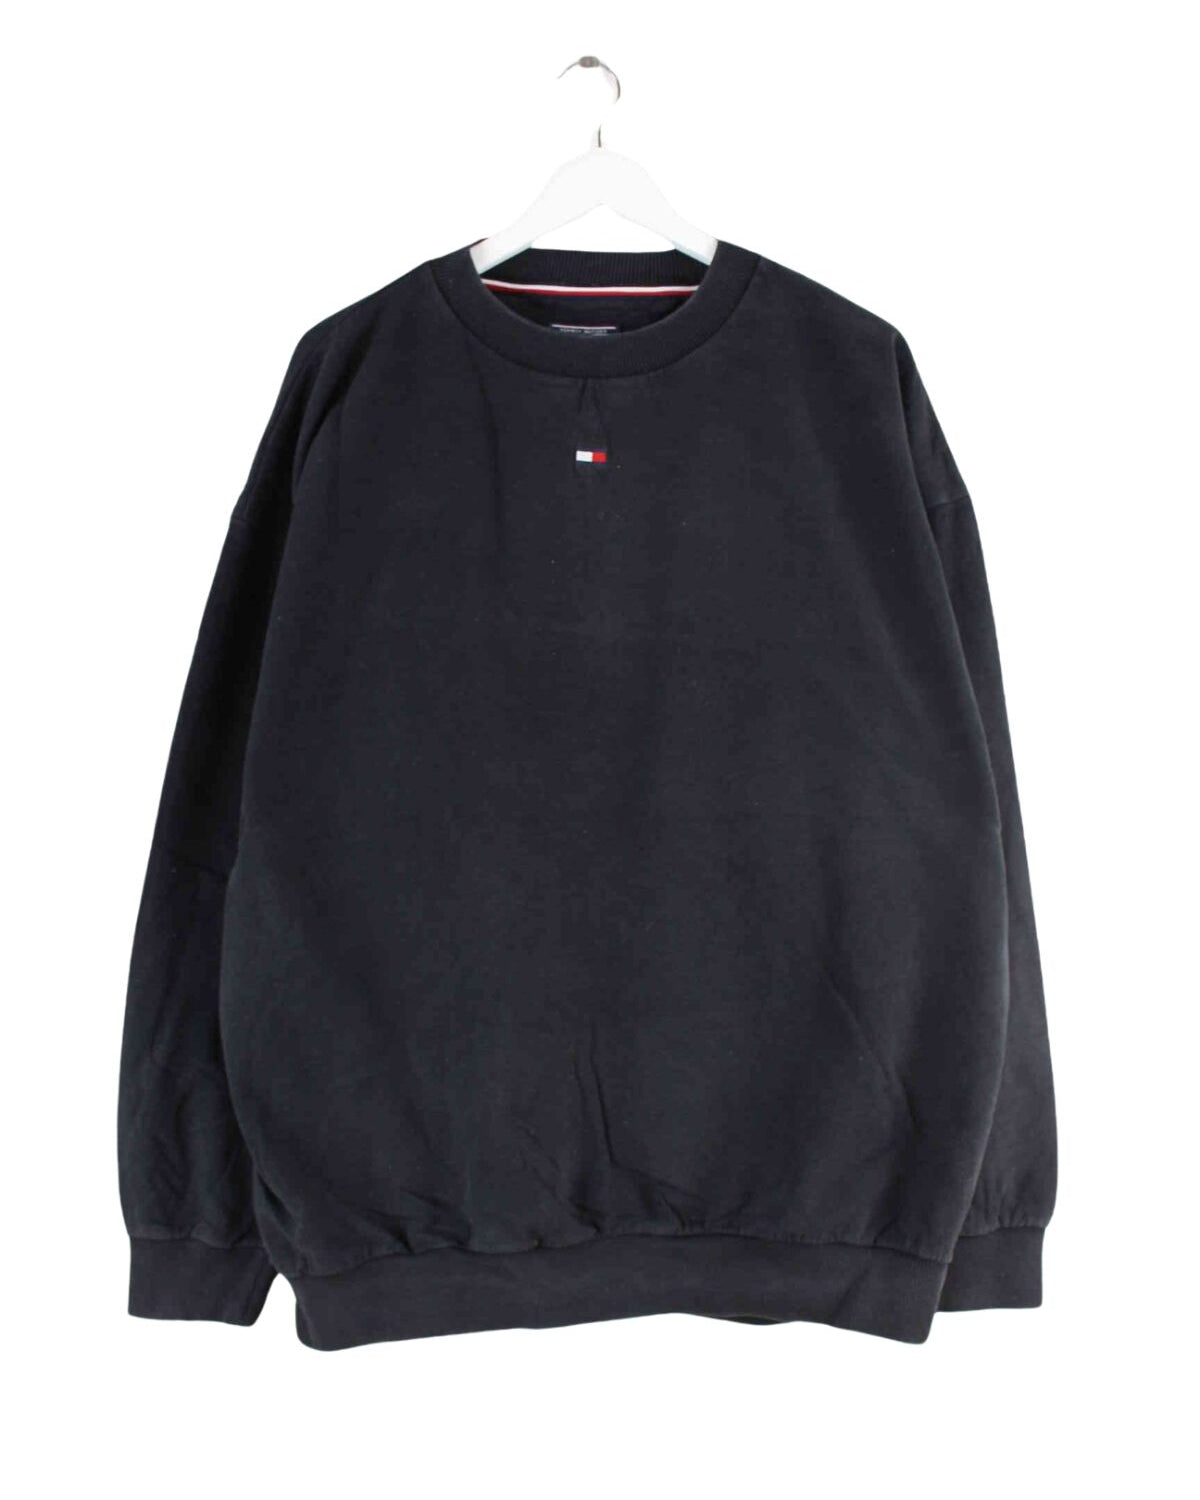 Tommy Hilfiger Embroidered Sweater Schwarz XL (front image)